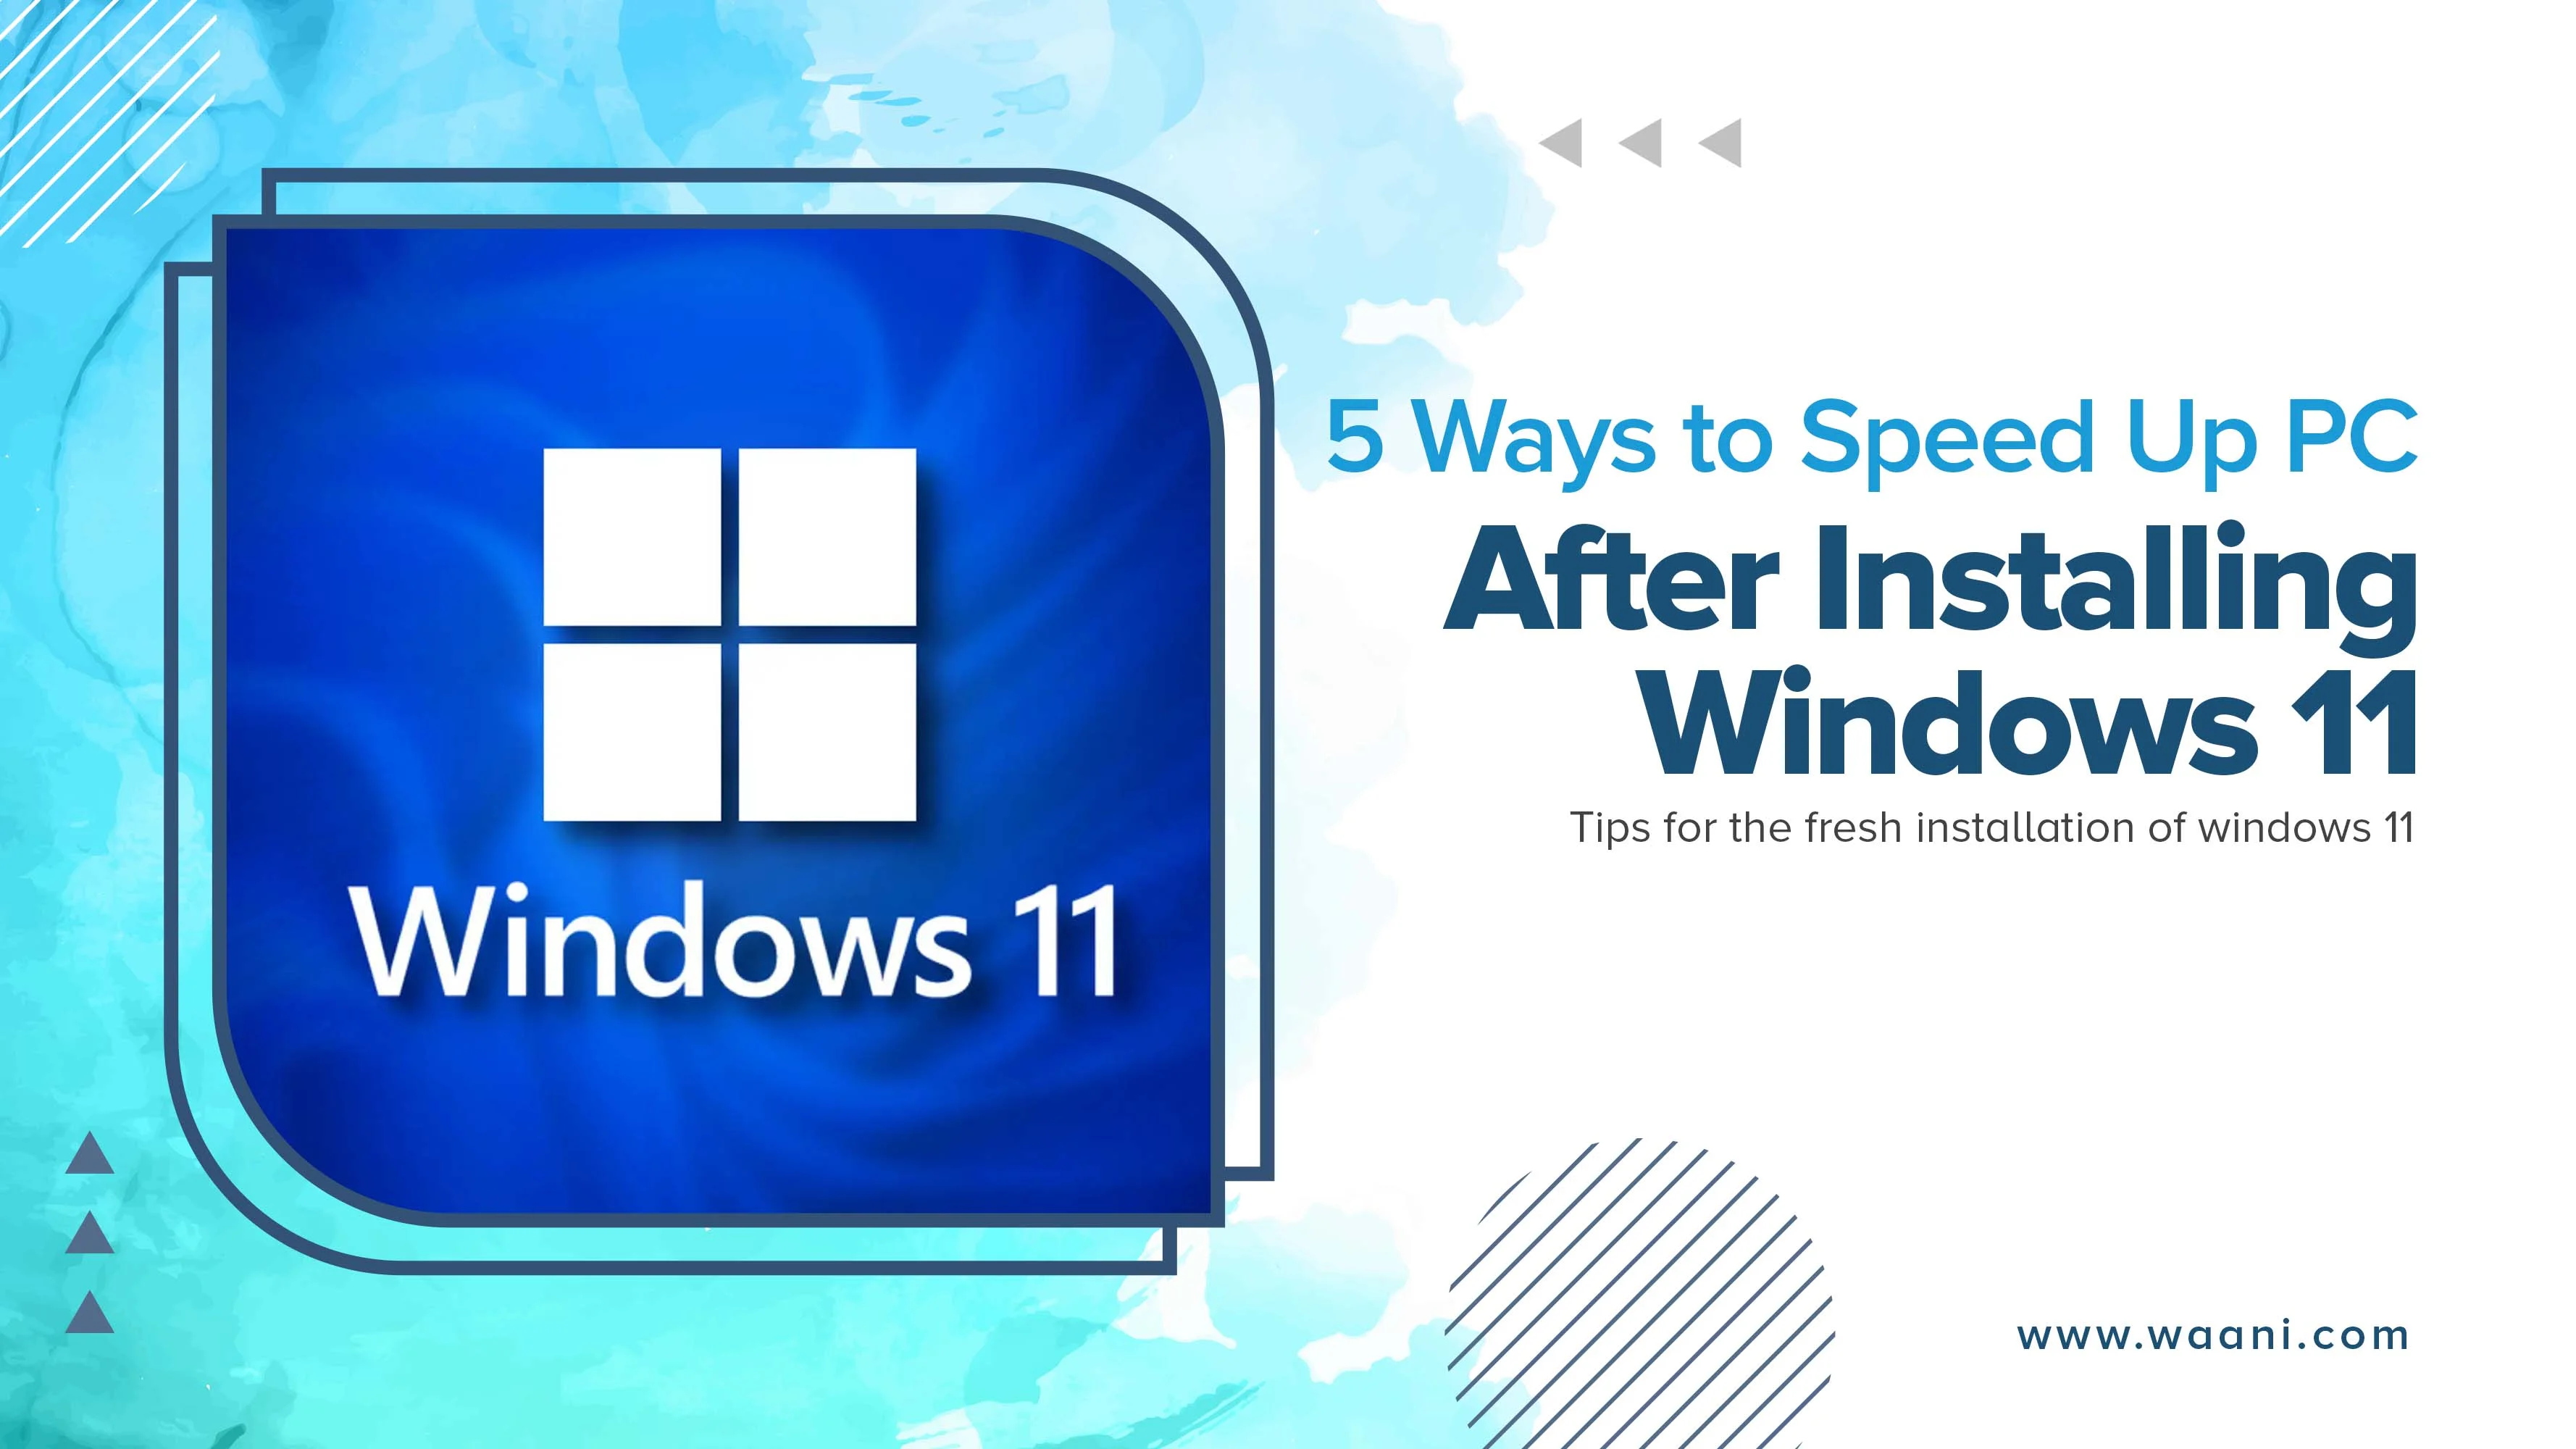 5 Ways to Make Your PC Faster After Installing Windows 11